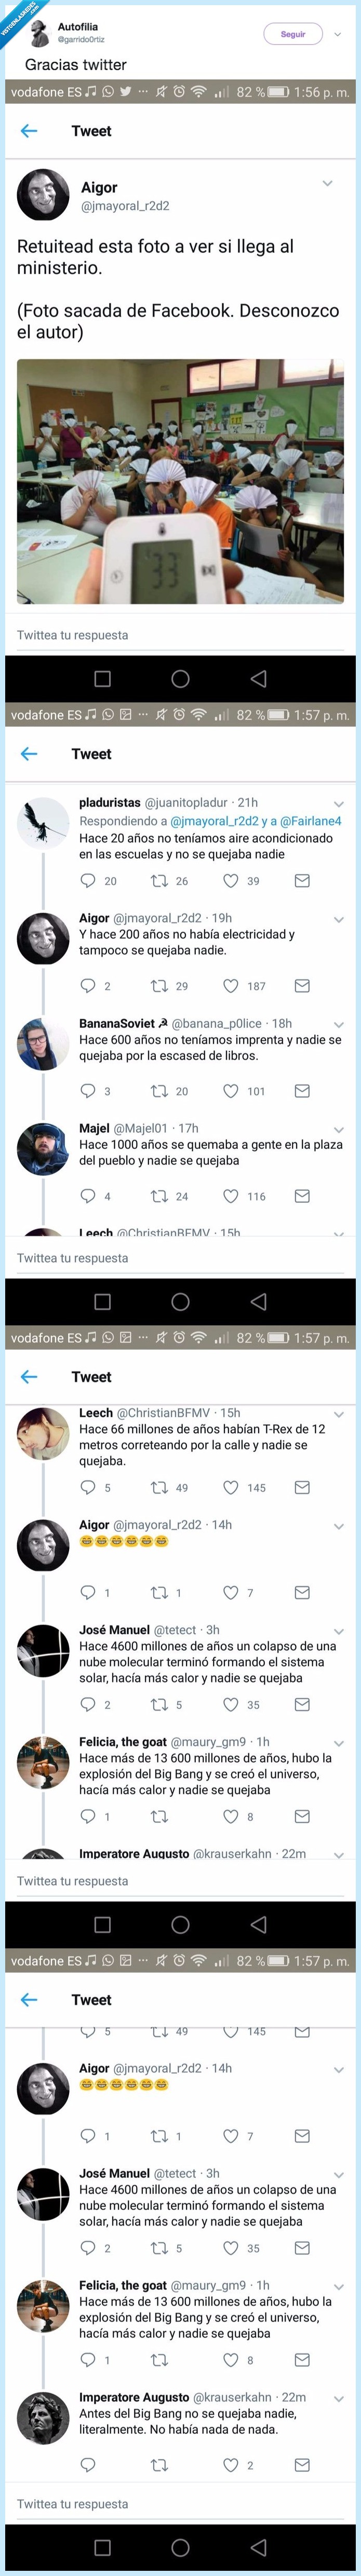 chiste,twitter,contar,solo